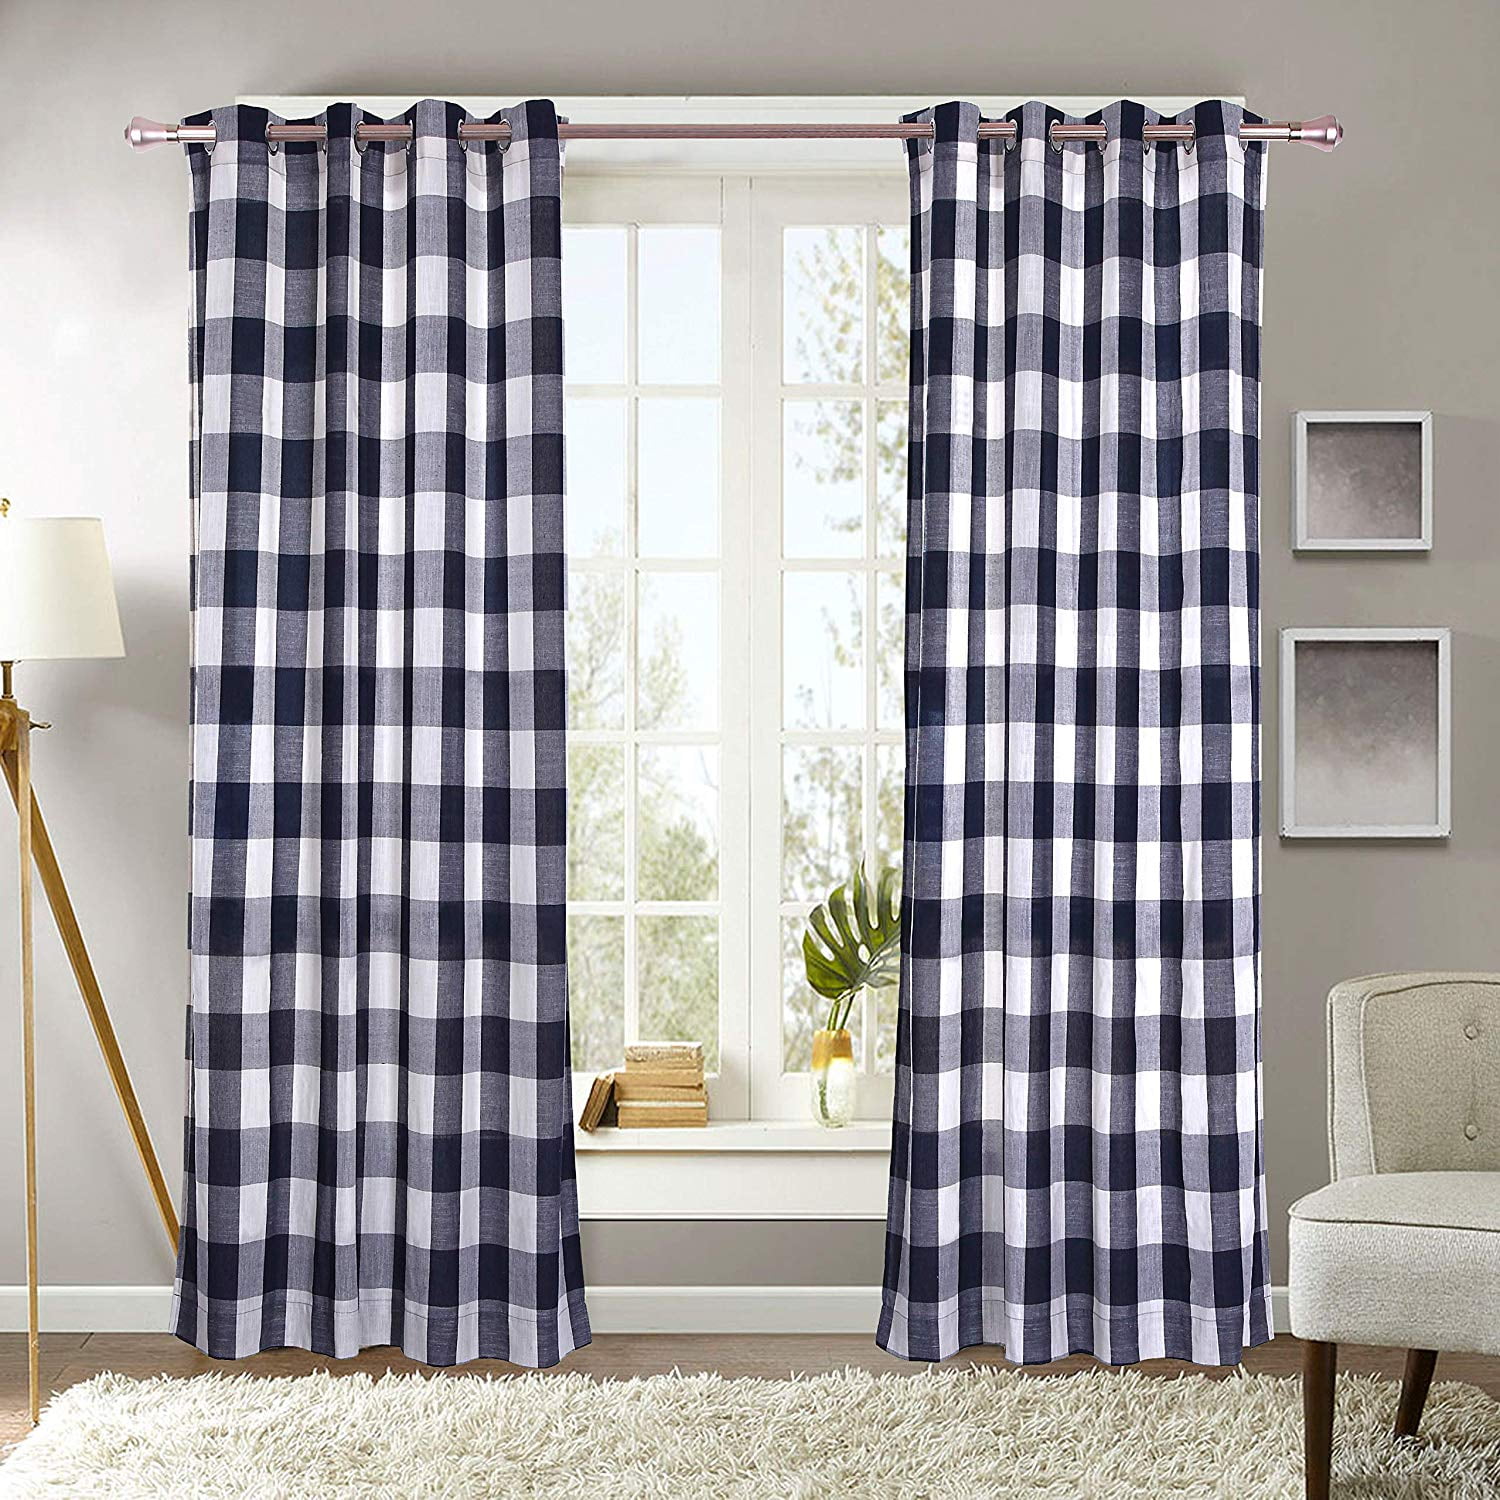 HLC.ME Hilltop Buffalo Check Textured Light Filtering Grommet Lightweight Window Curtains Drapery for Bedroom 52 x 84 Inch, Beige 2 Panels Dining Room & Living Room